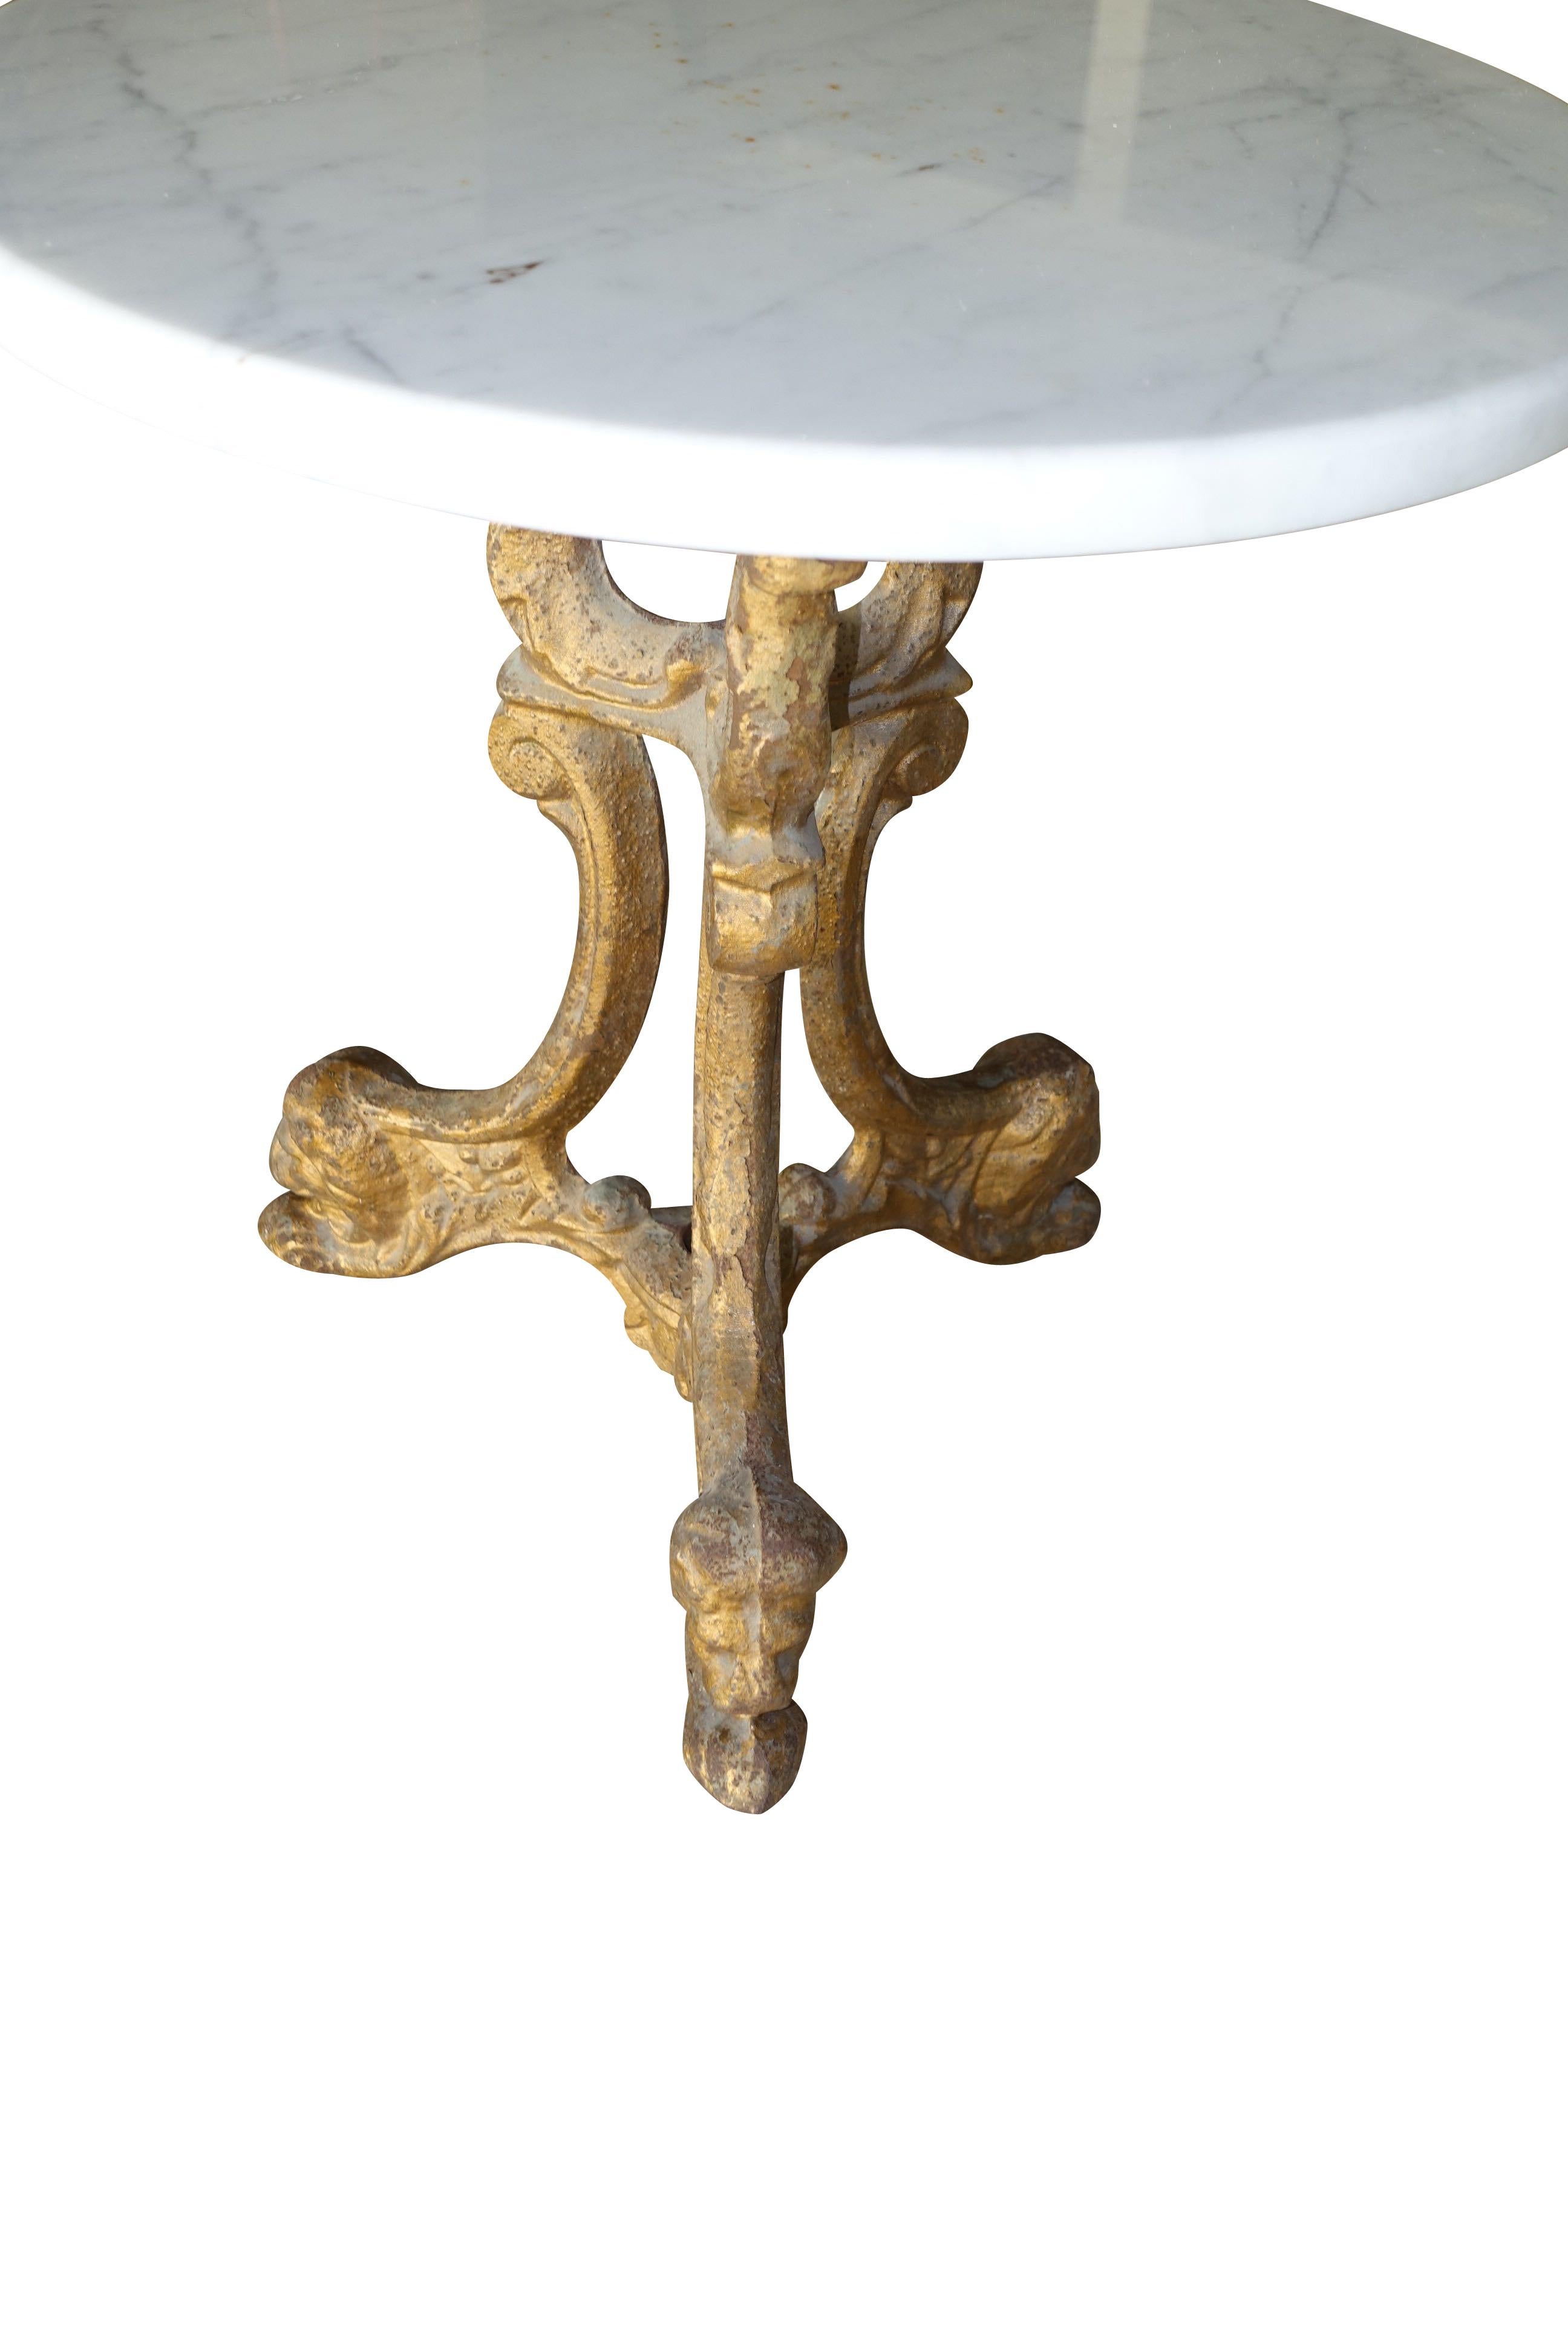 This 1920s French gold gilt metal cocktail table has was originally housed on a cruise liner.
A white marble top sits atop the gold gilt metal base.
A decorative griffin foot motif adorns the three legs.
The table is very sturdy.